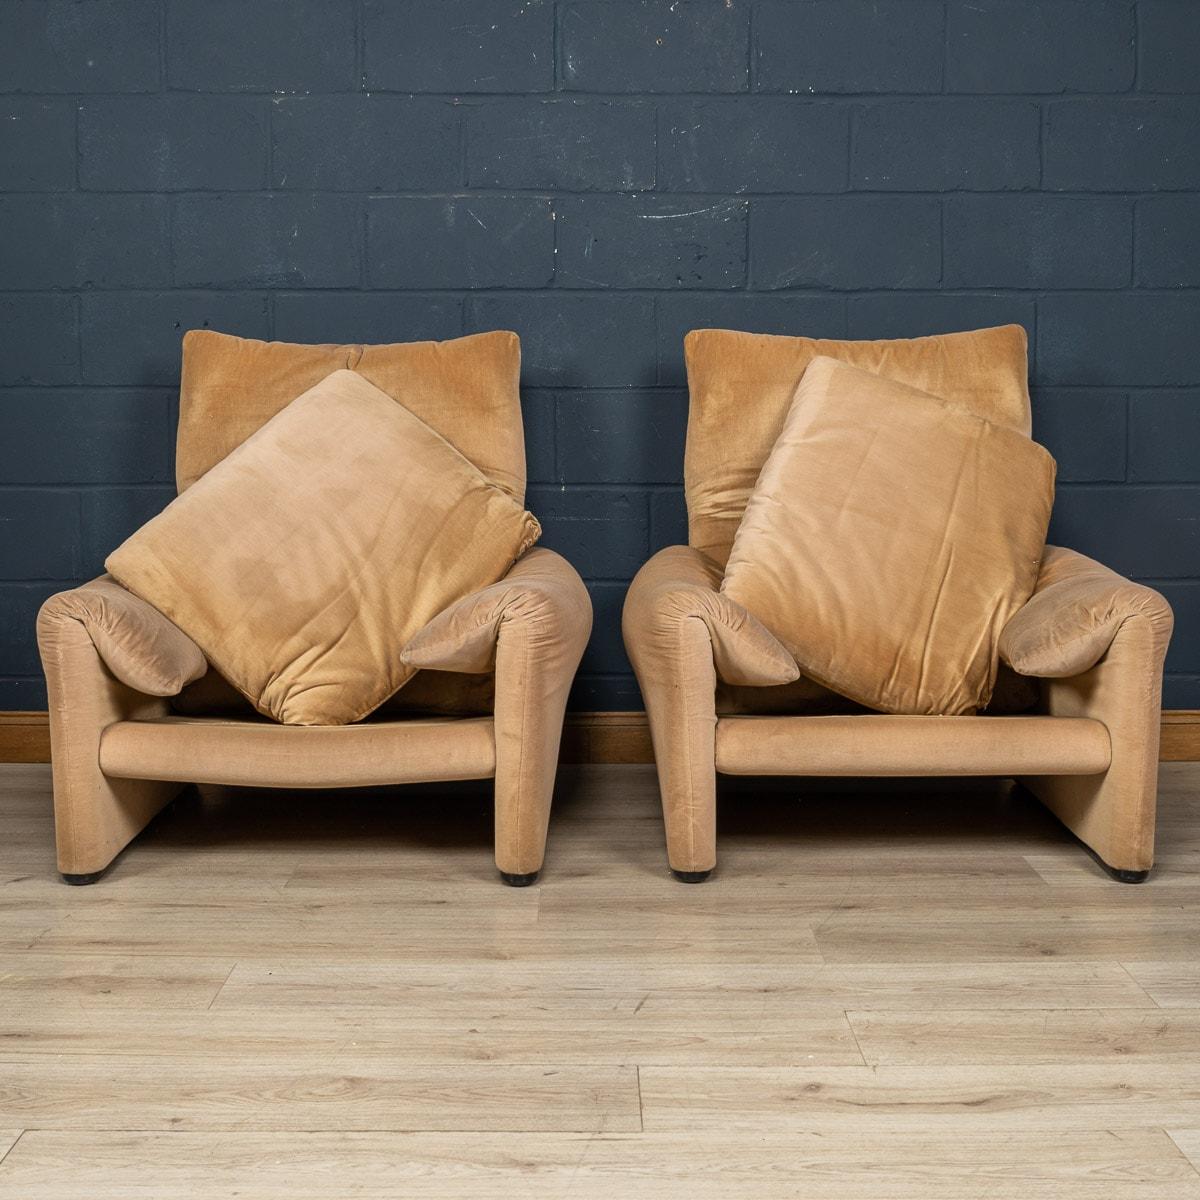 20th Century A Pair Of Italian Maralunga Armchairs By Vico Magistretti For Cassina, c.1980